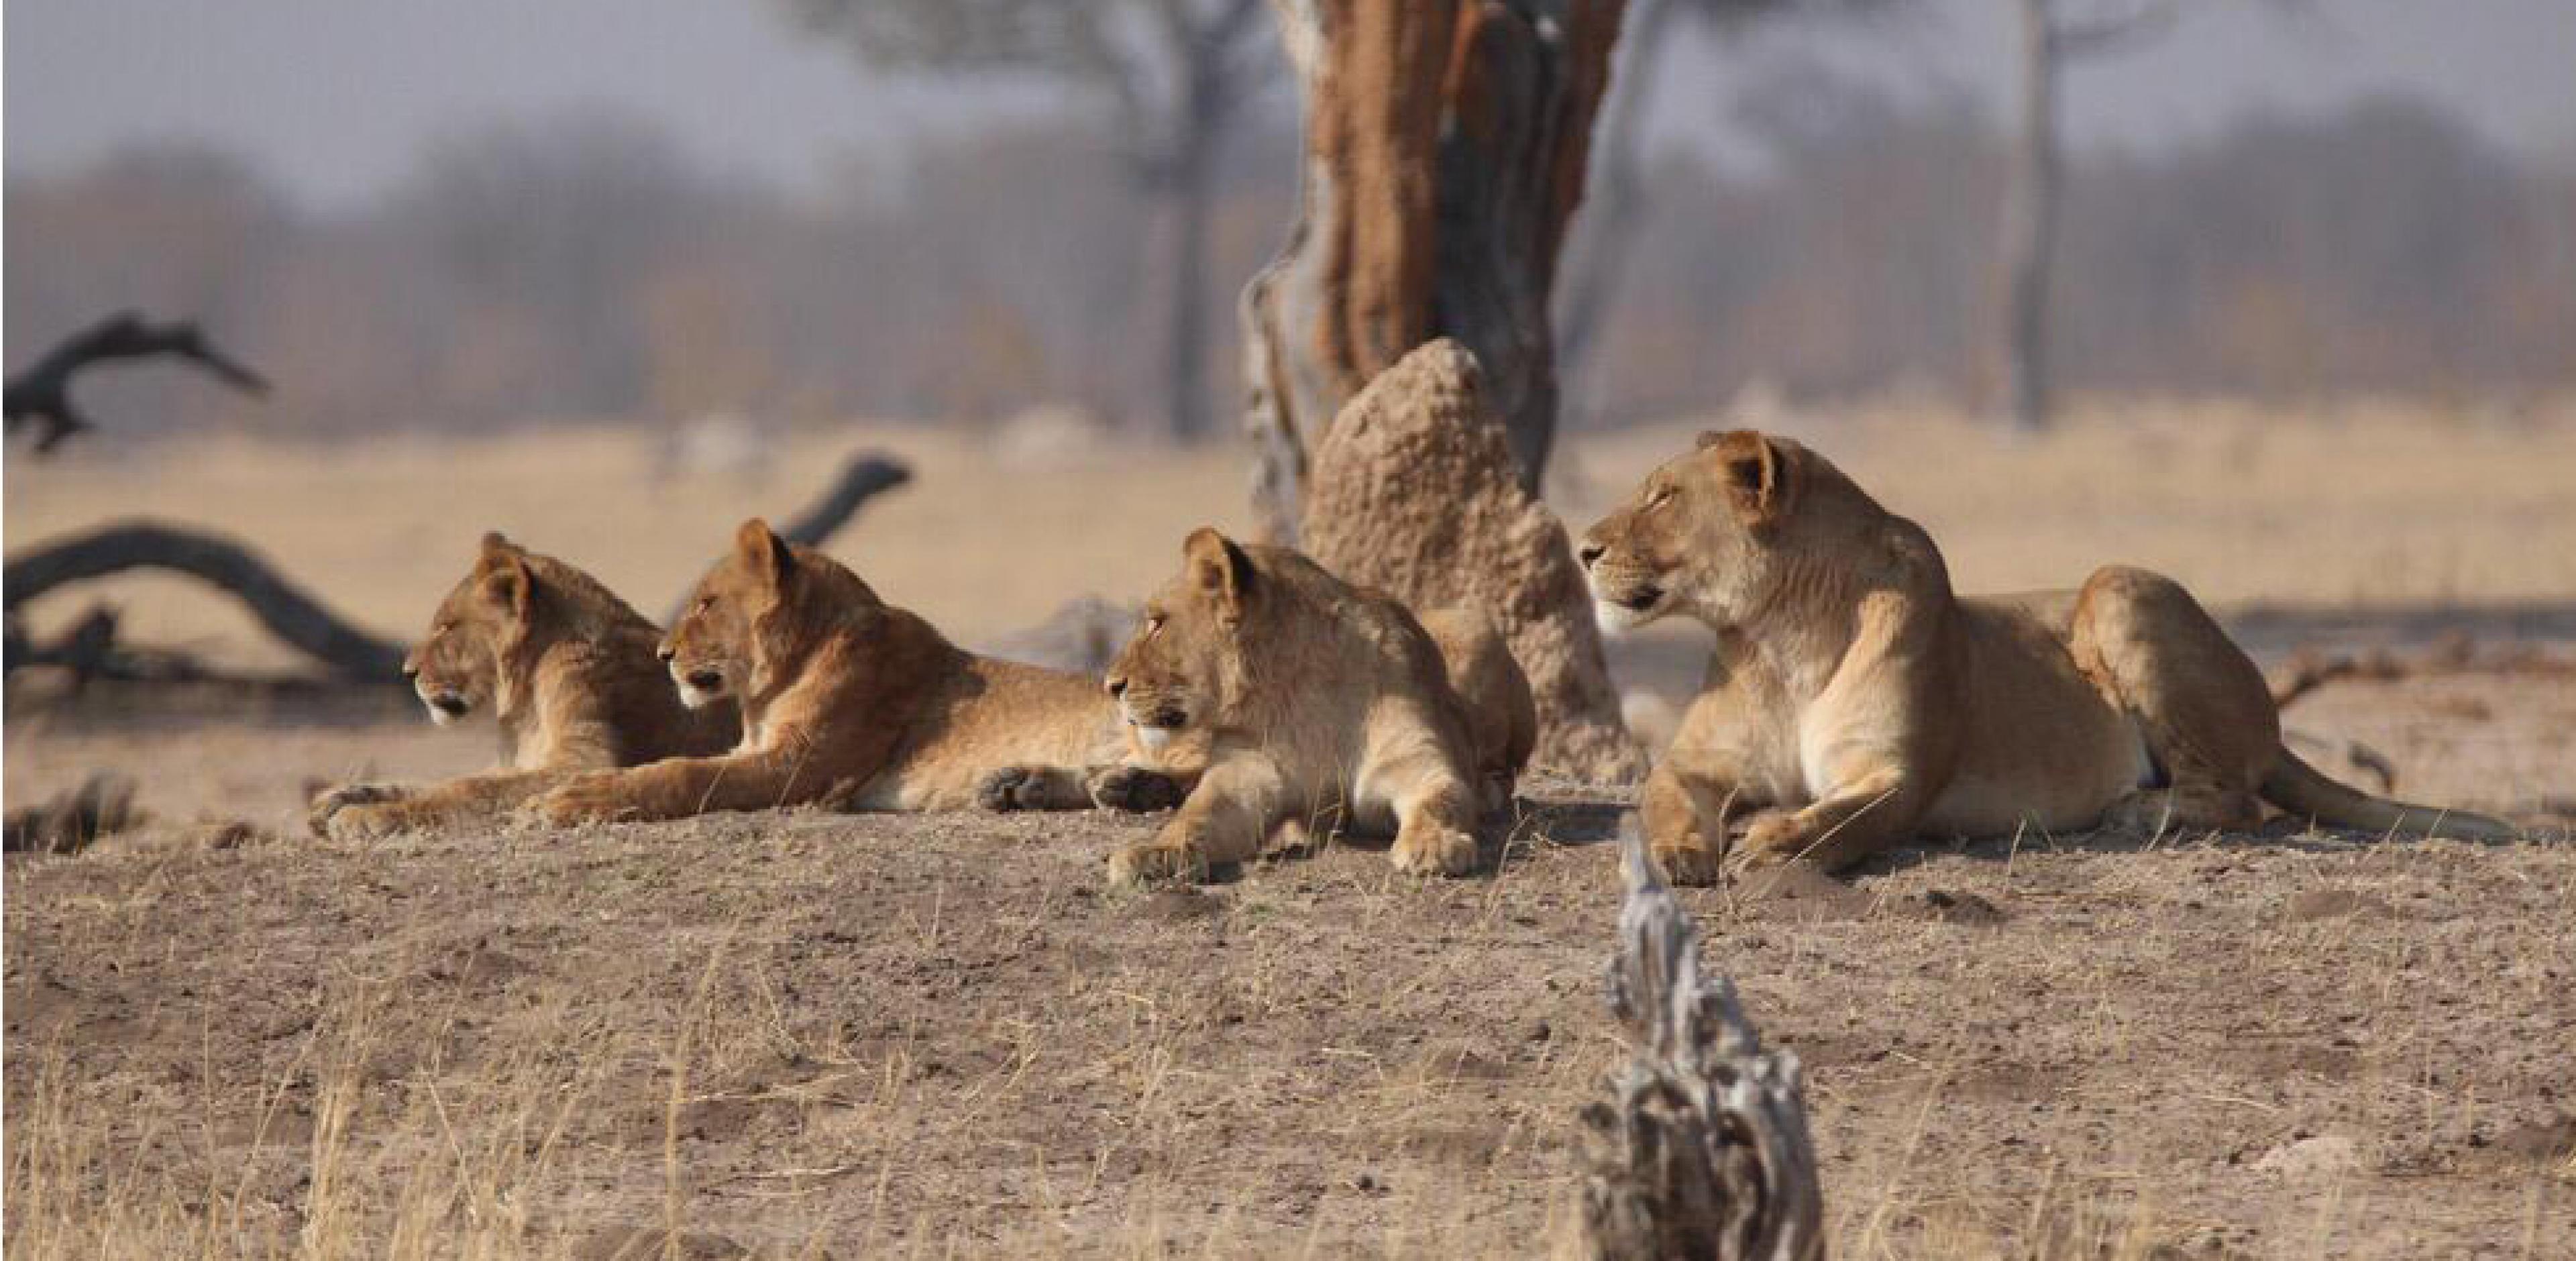 lioness and cubs in zimbabwe